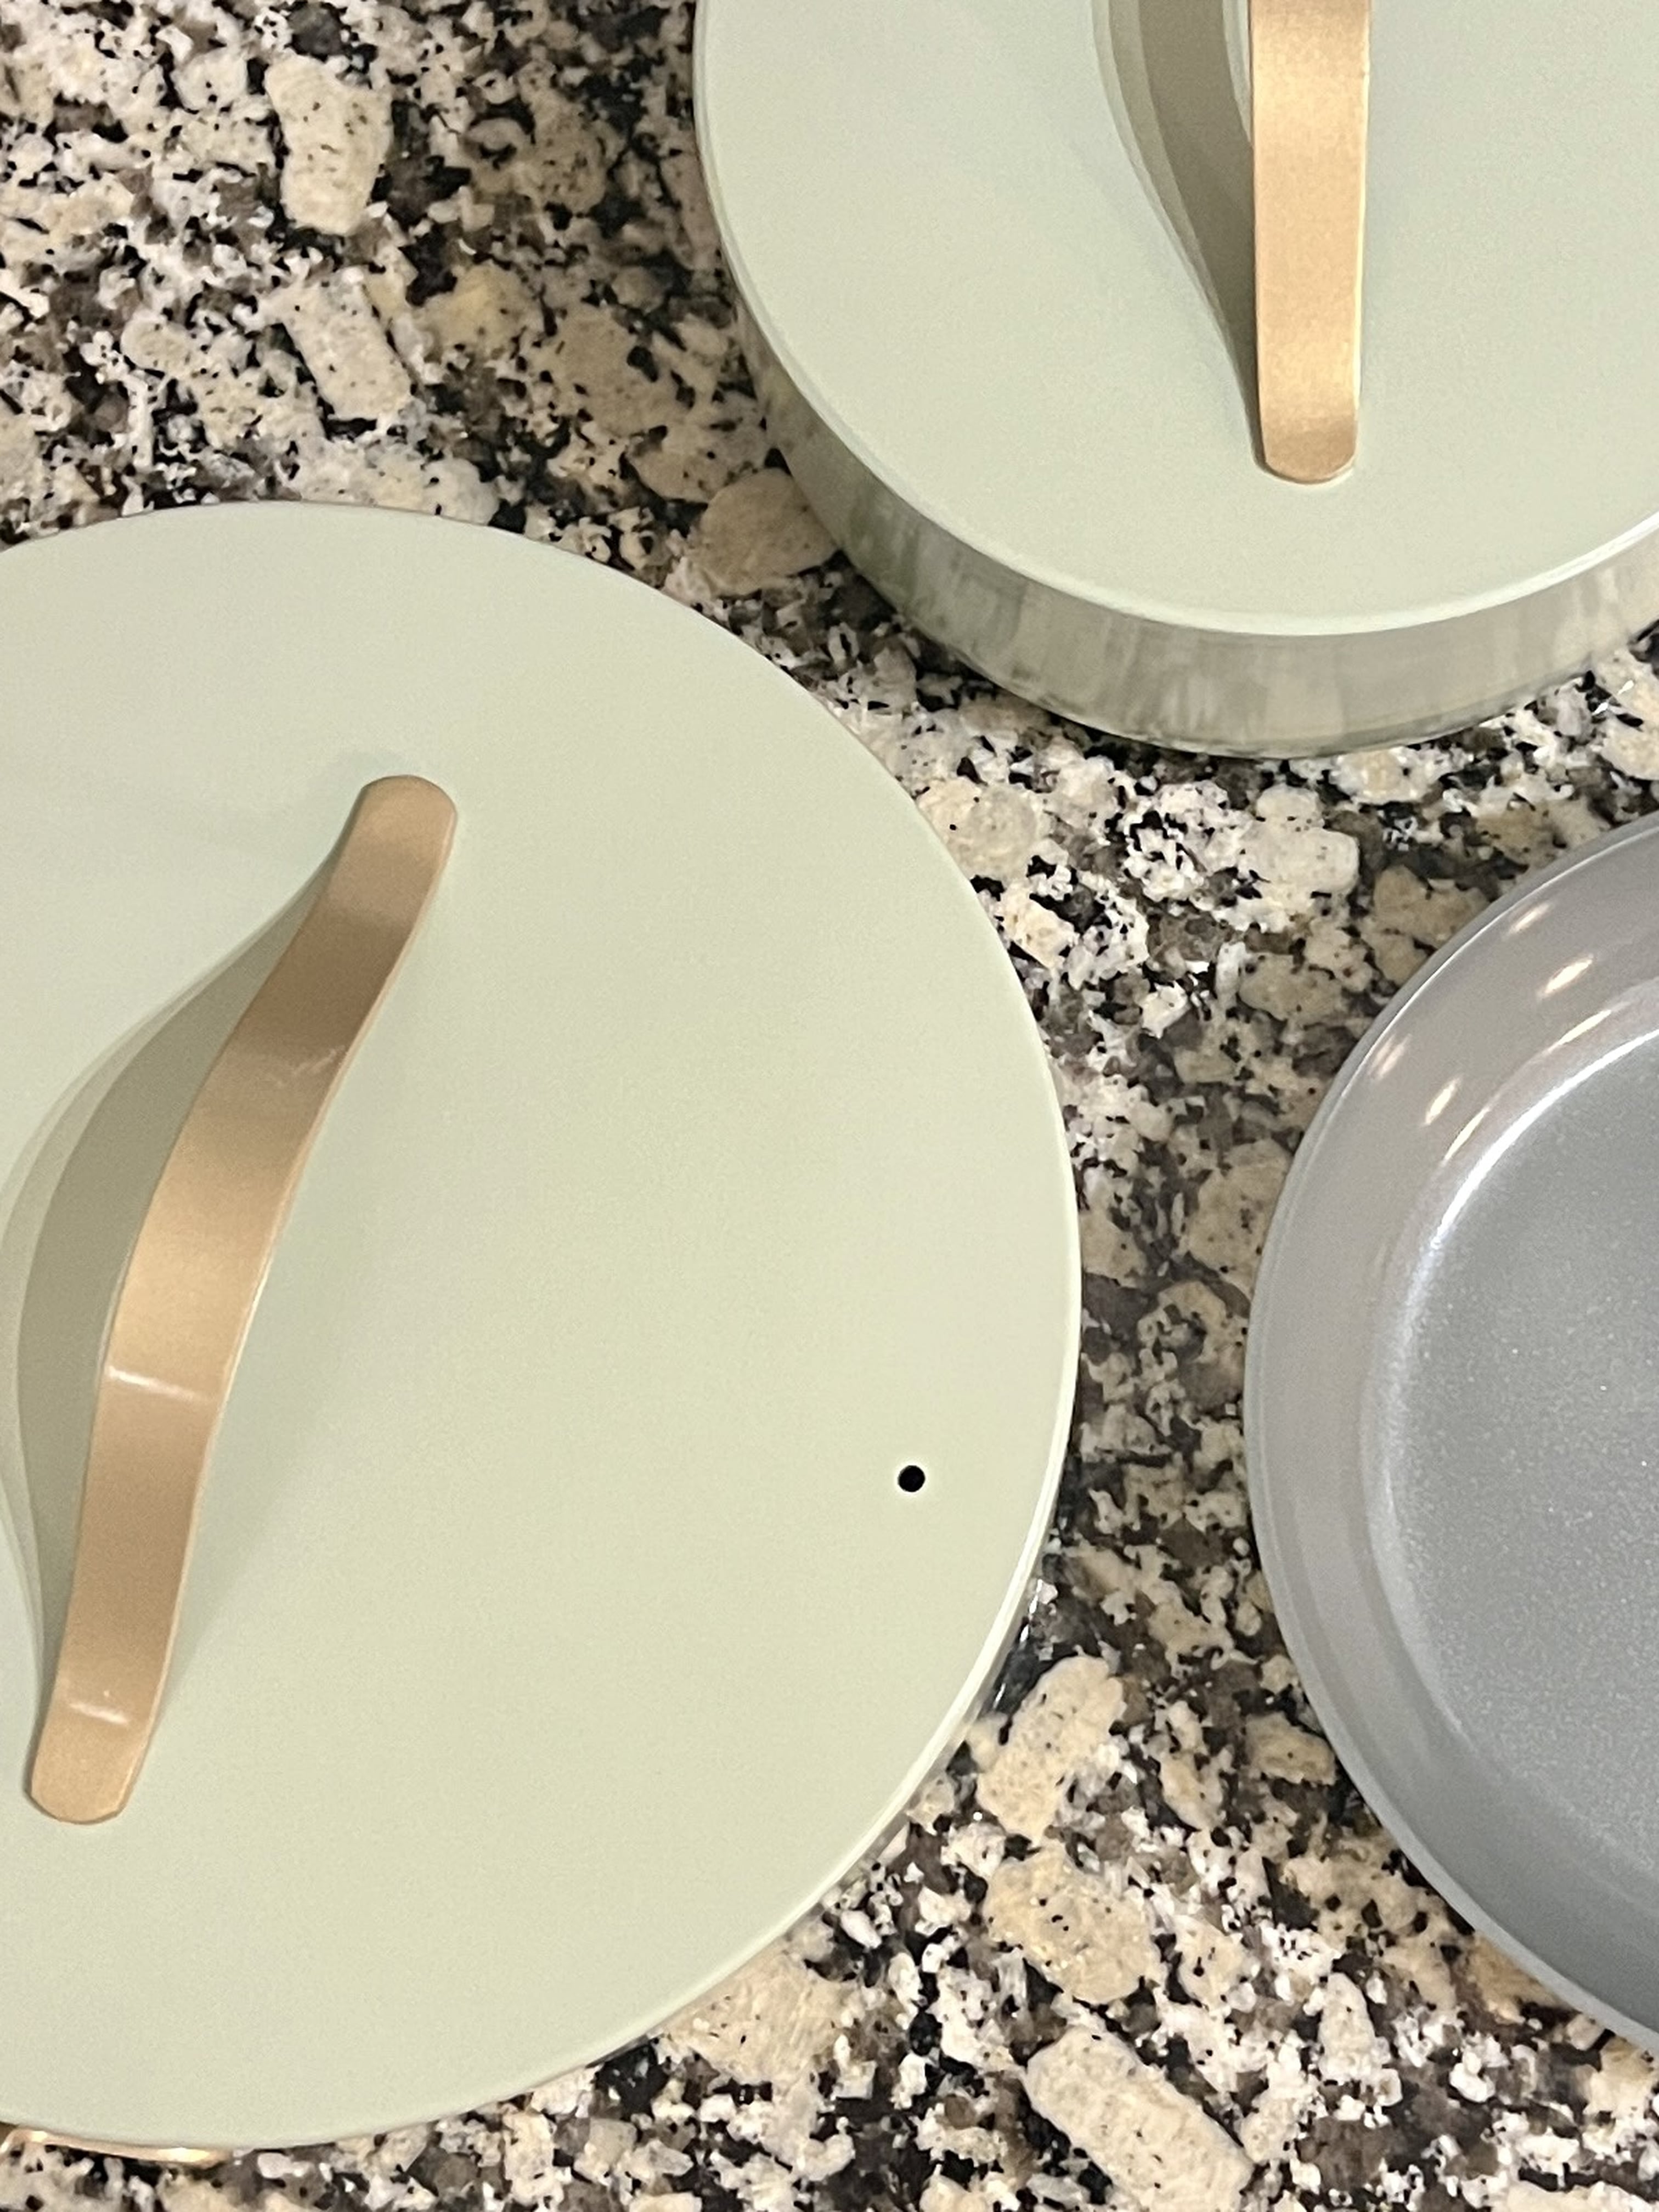 I Tried Drew Barrymore’s Beautiful Cookware Line, and It Truly Lives Up to Its Name